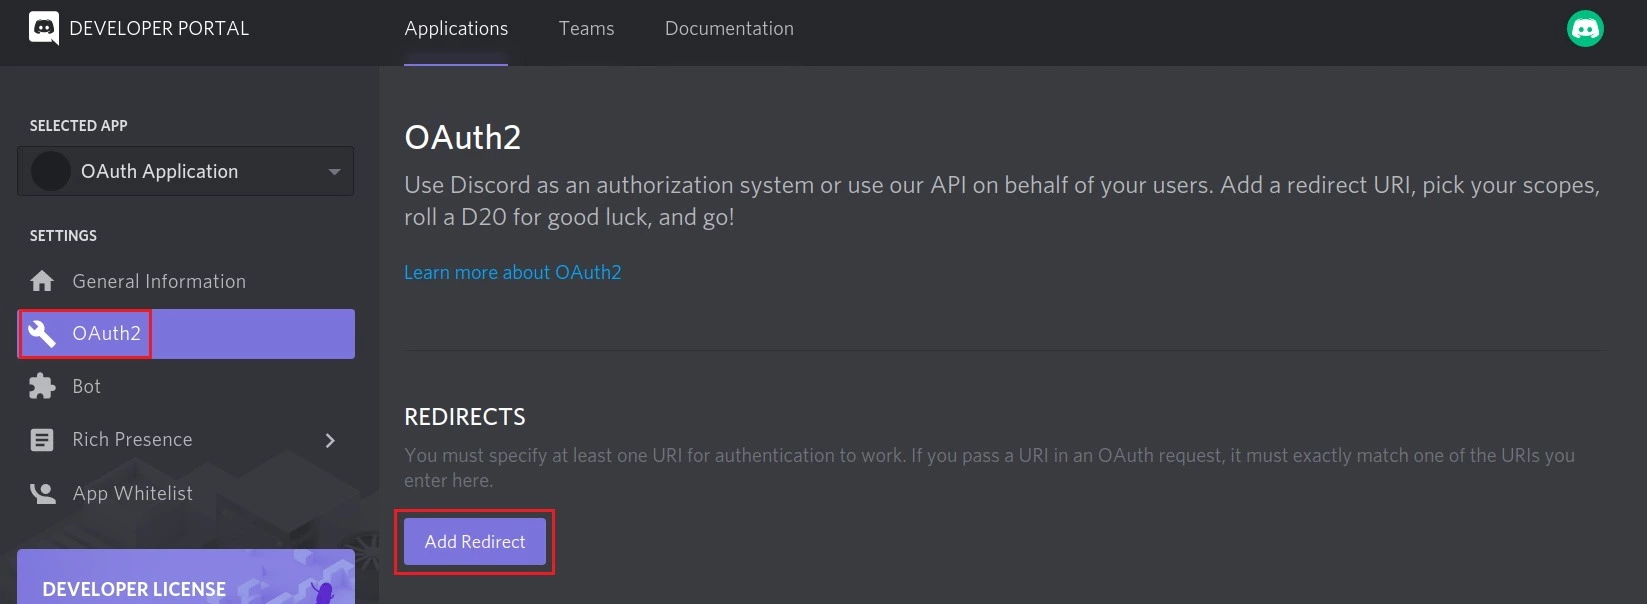 Discord as IDP - Single Sign-On (SSO) for Shopify - Redirect URL